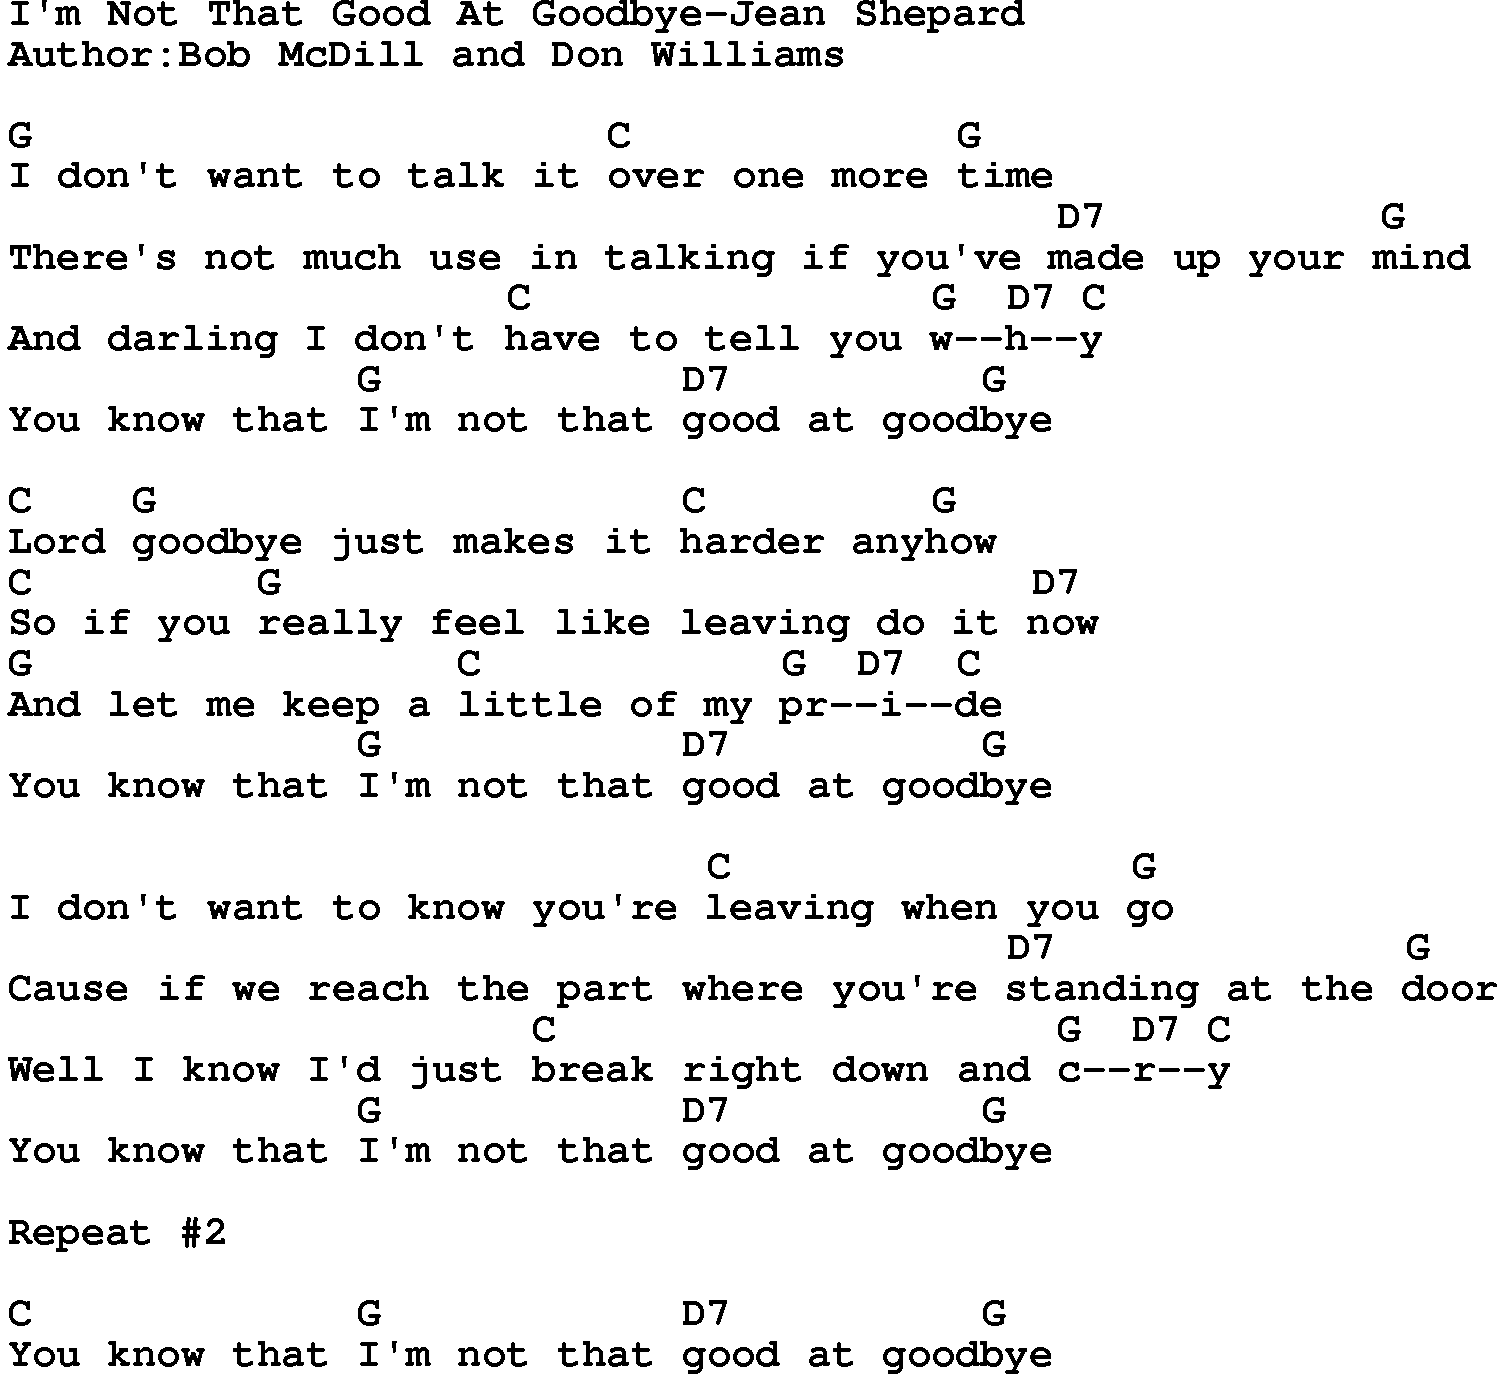 Country music song: I'm Not That Good At Goodbye-Jean Shepard lyrics and chords